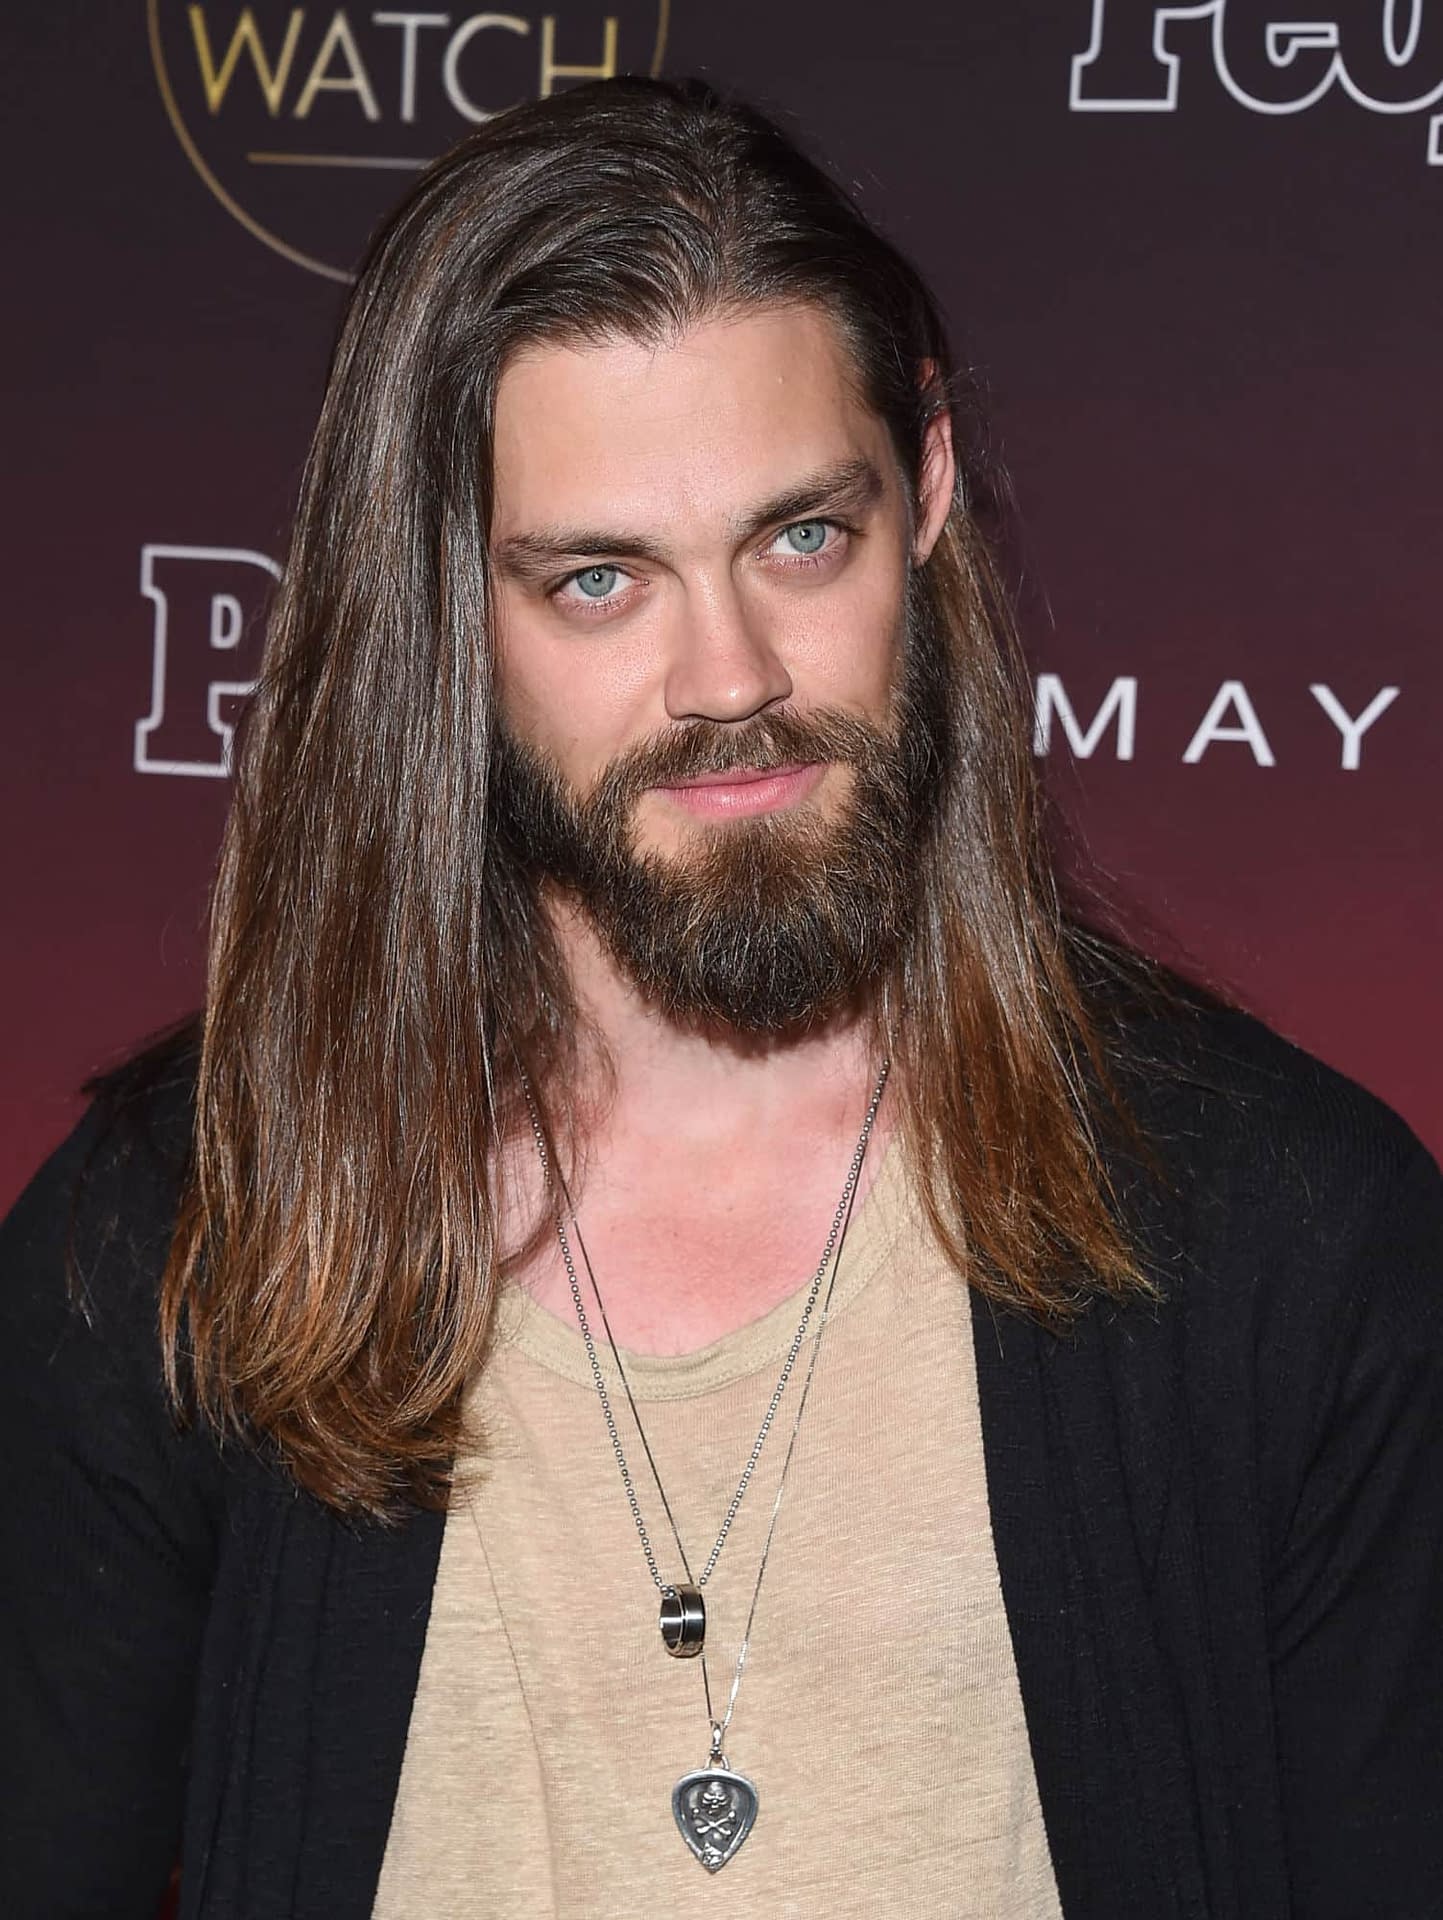 'The Walking Dead': Tom Payne Pulls a Samson for "New Beginnings," Good Cause